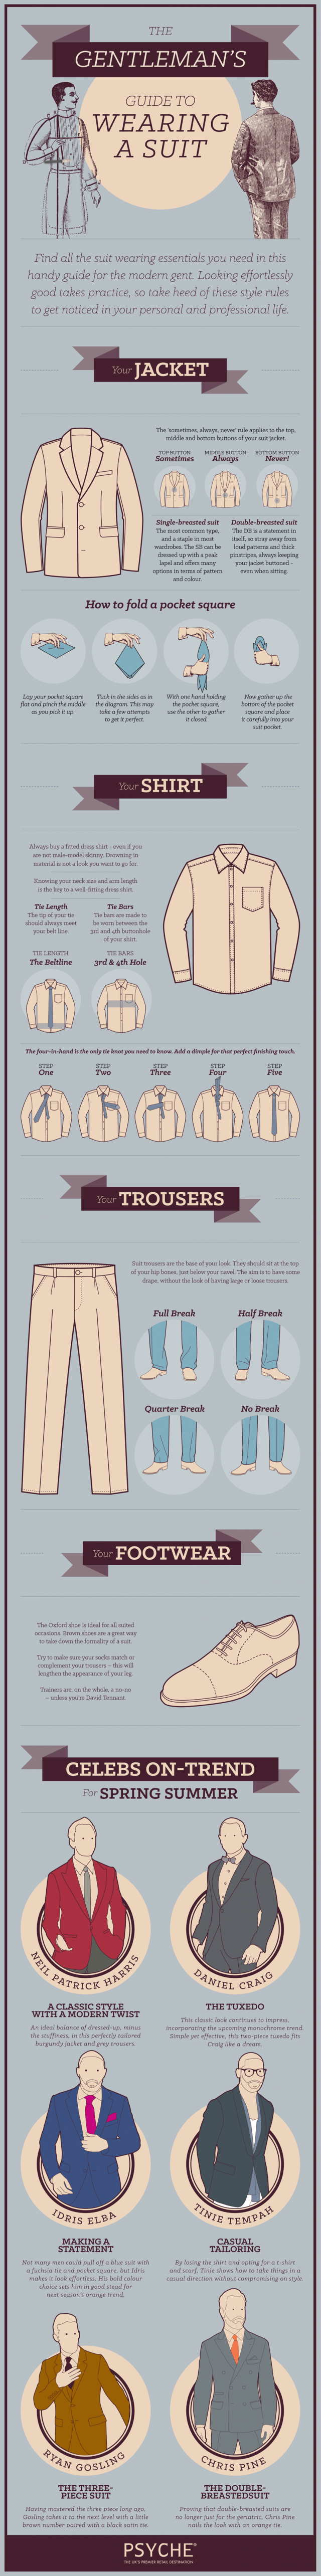 Gentleman's Guide to Wearing a Suit Infographic